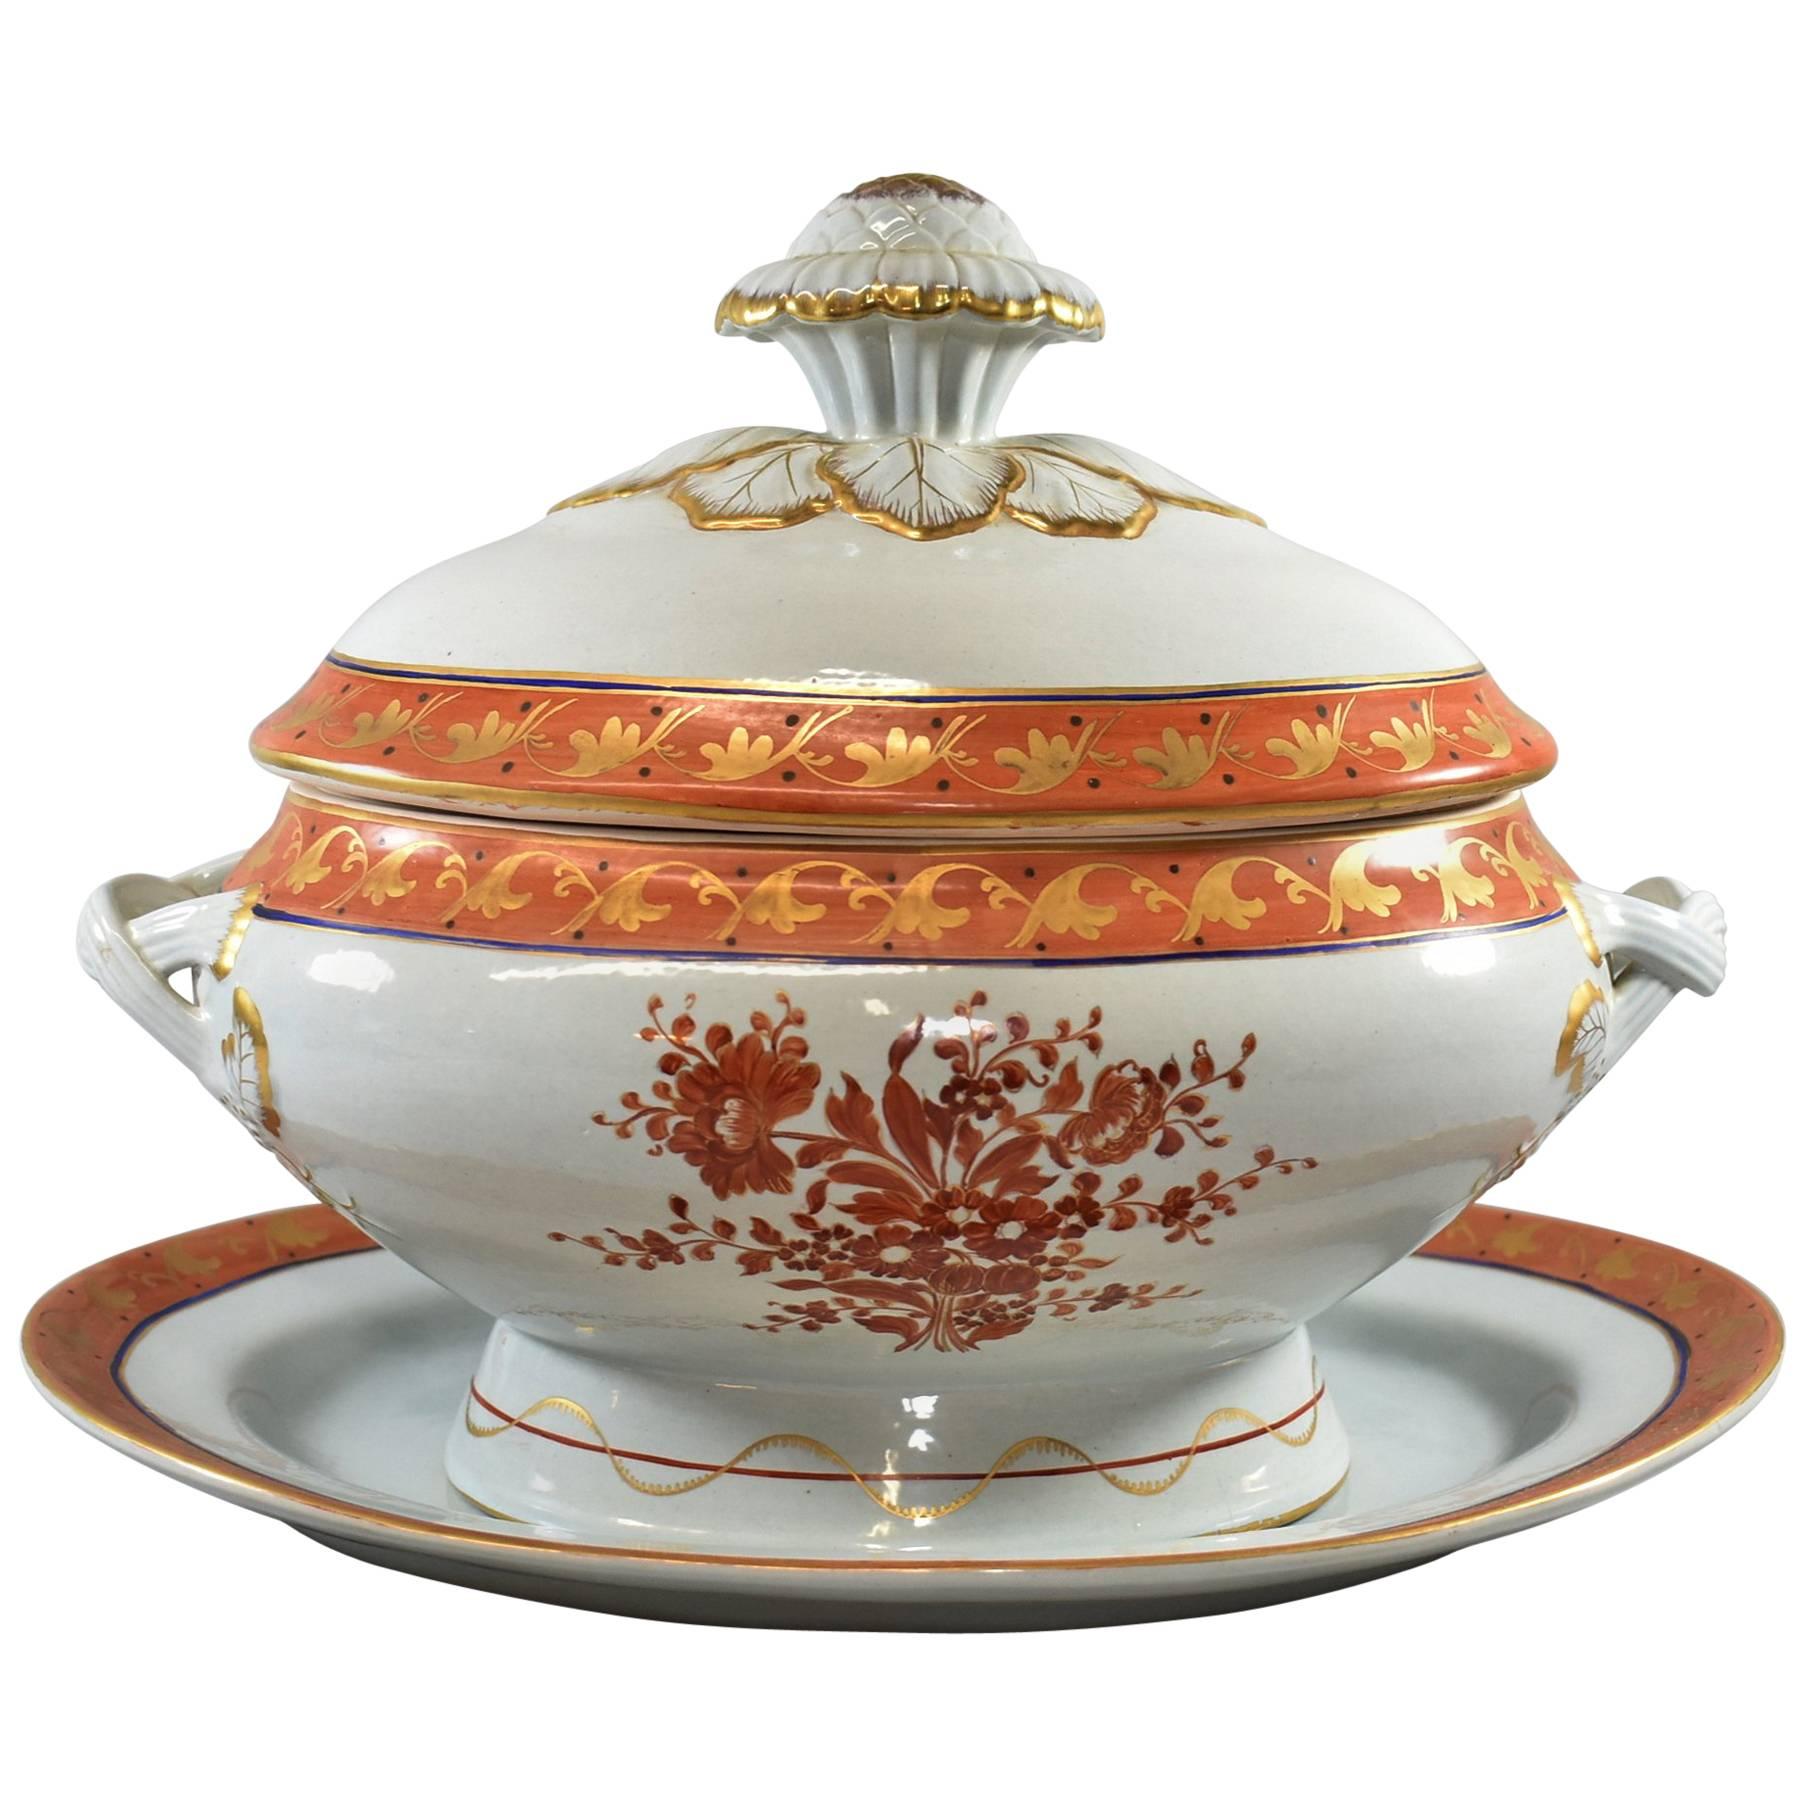 Italian Covered Soup Tureen and Underplate in Orange/Gold Chinese Bouquet Patter